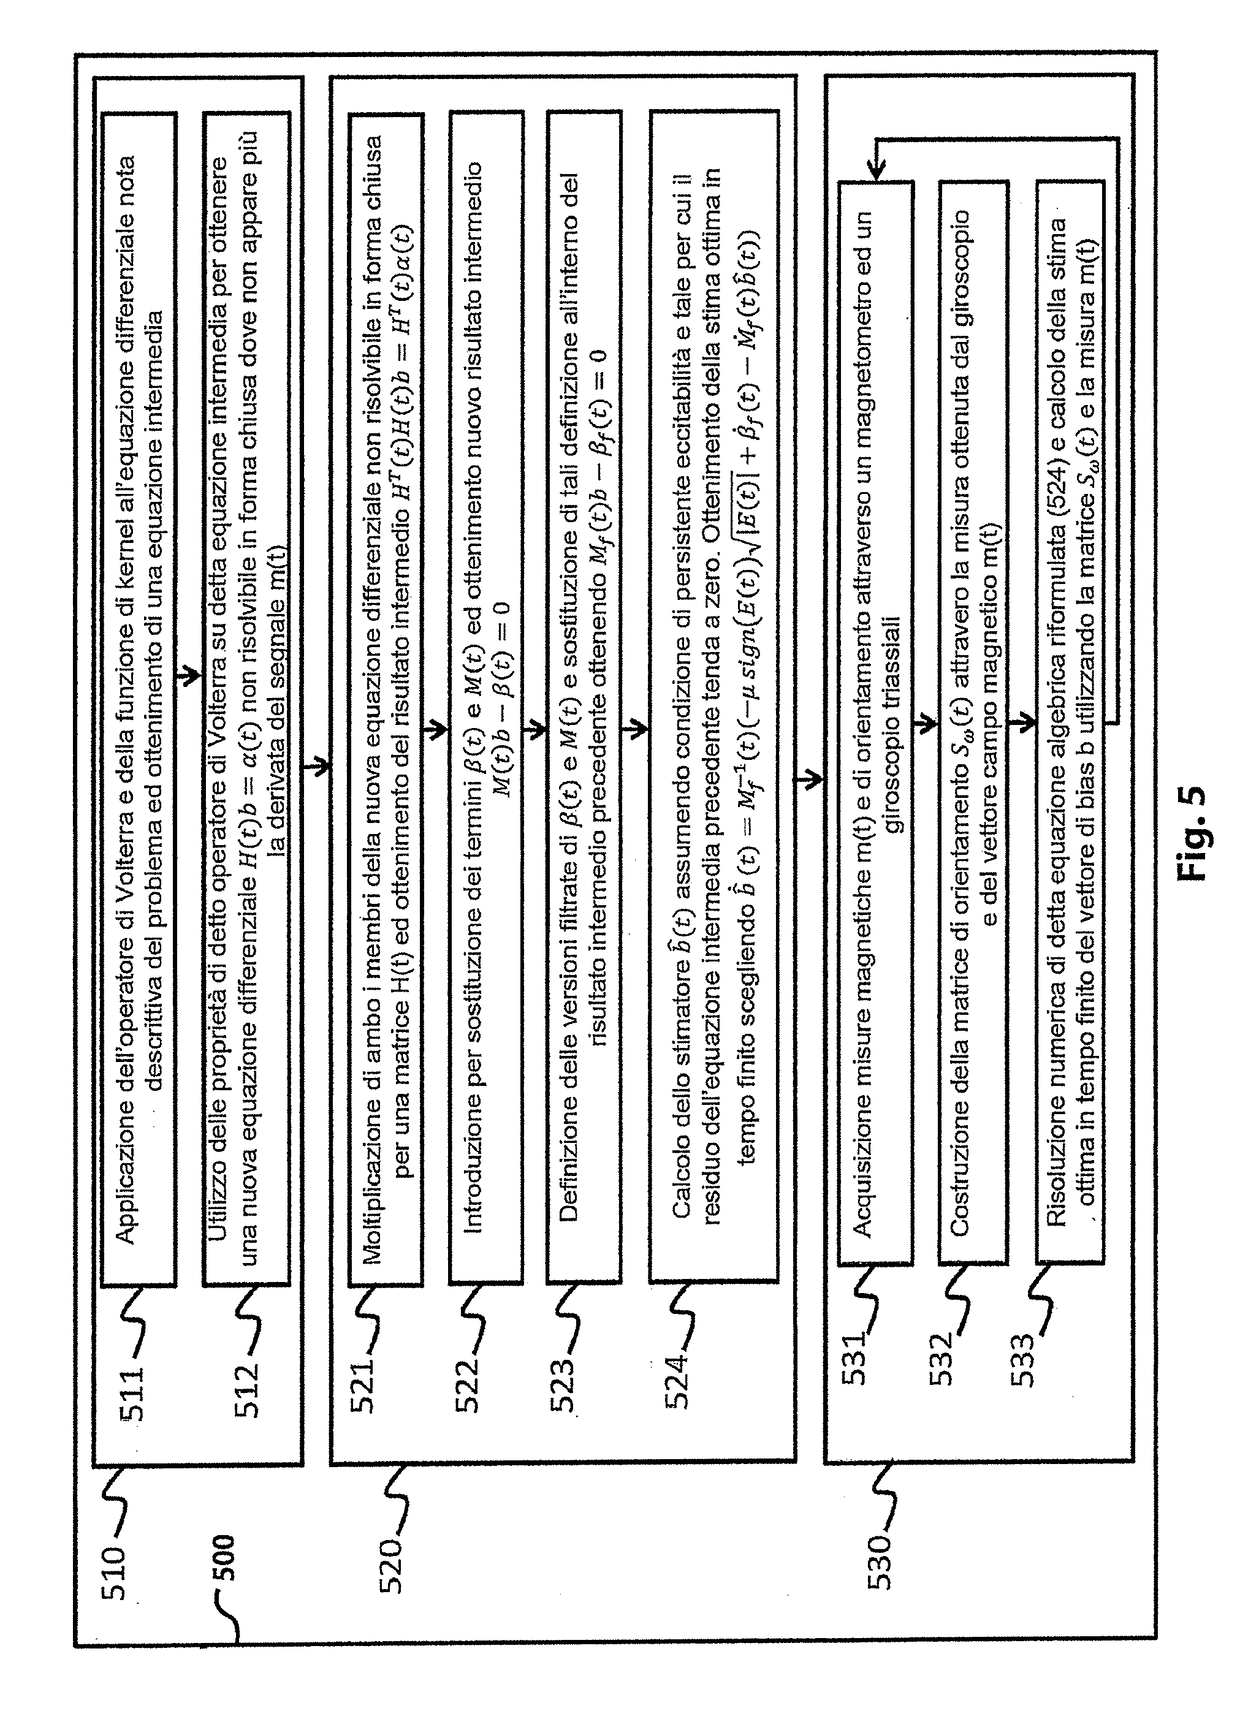 System and method for calibrating magnetic sensors in real and finite time